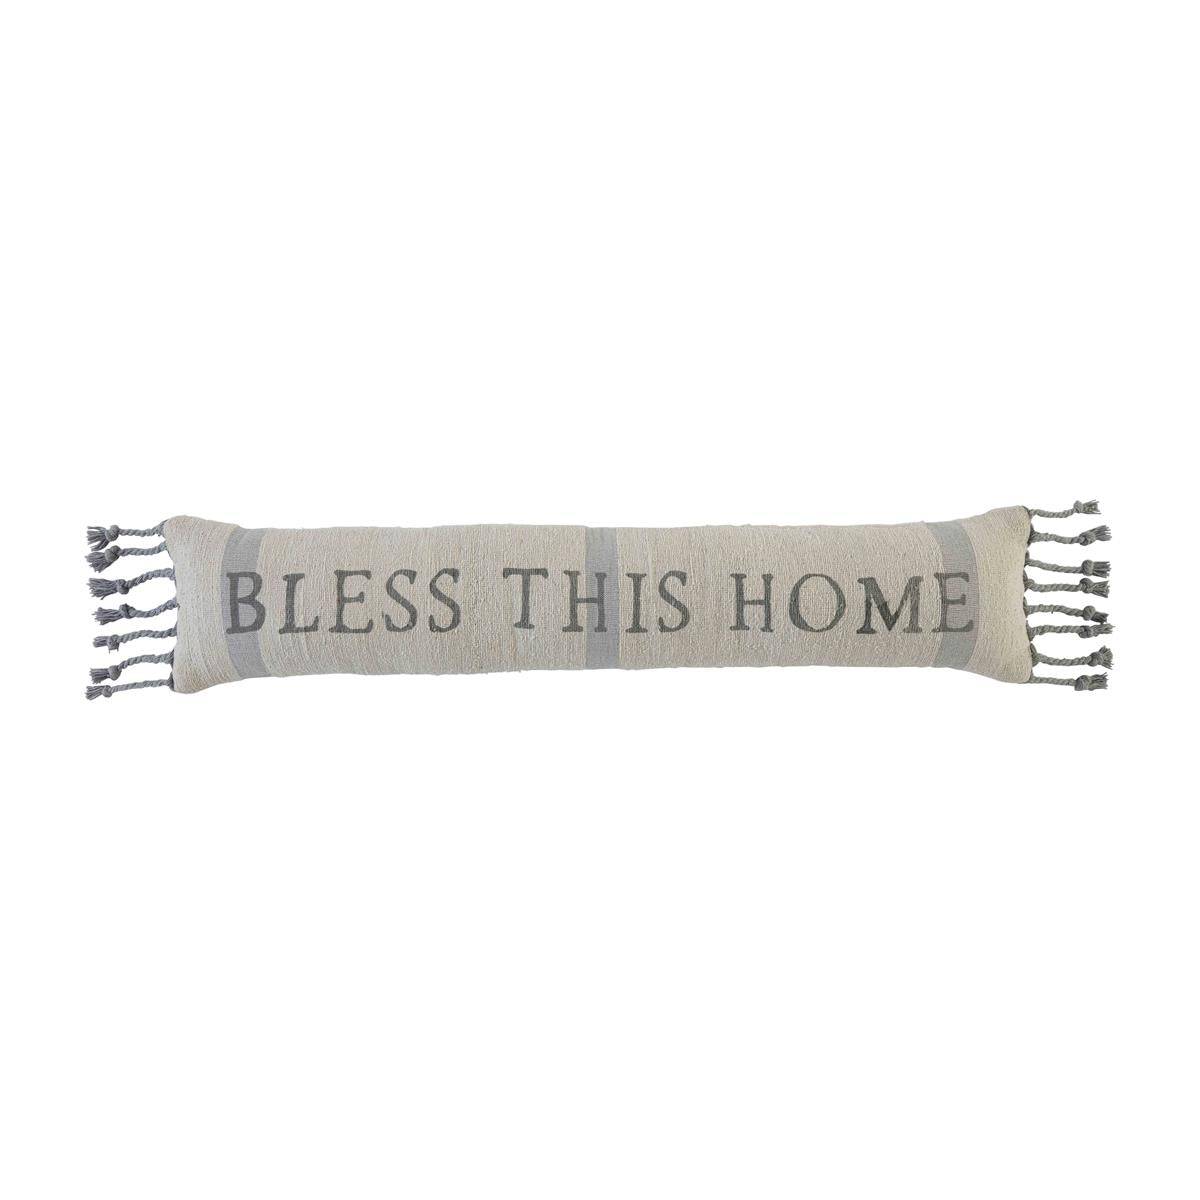 MUD PIE - SENTIMENT FRINGE LONG PILLOW - BLESS THIS HOME - Findlay Rowe Designs